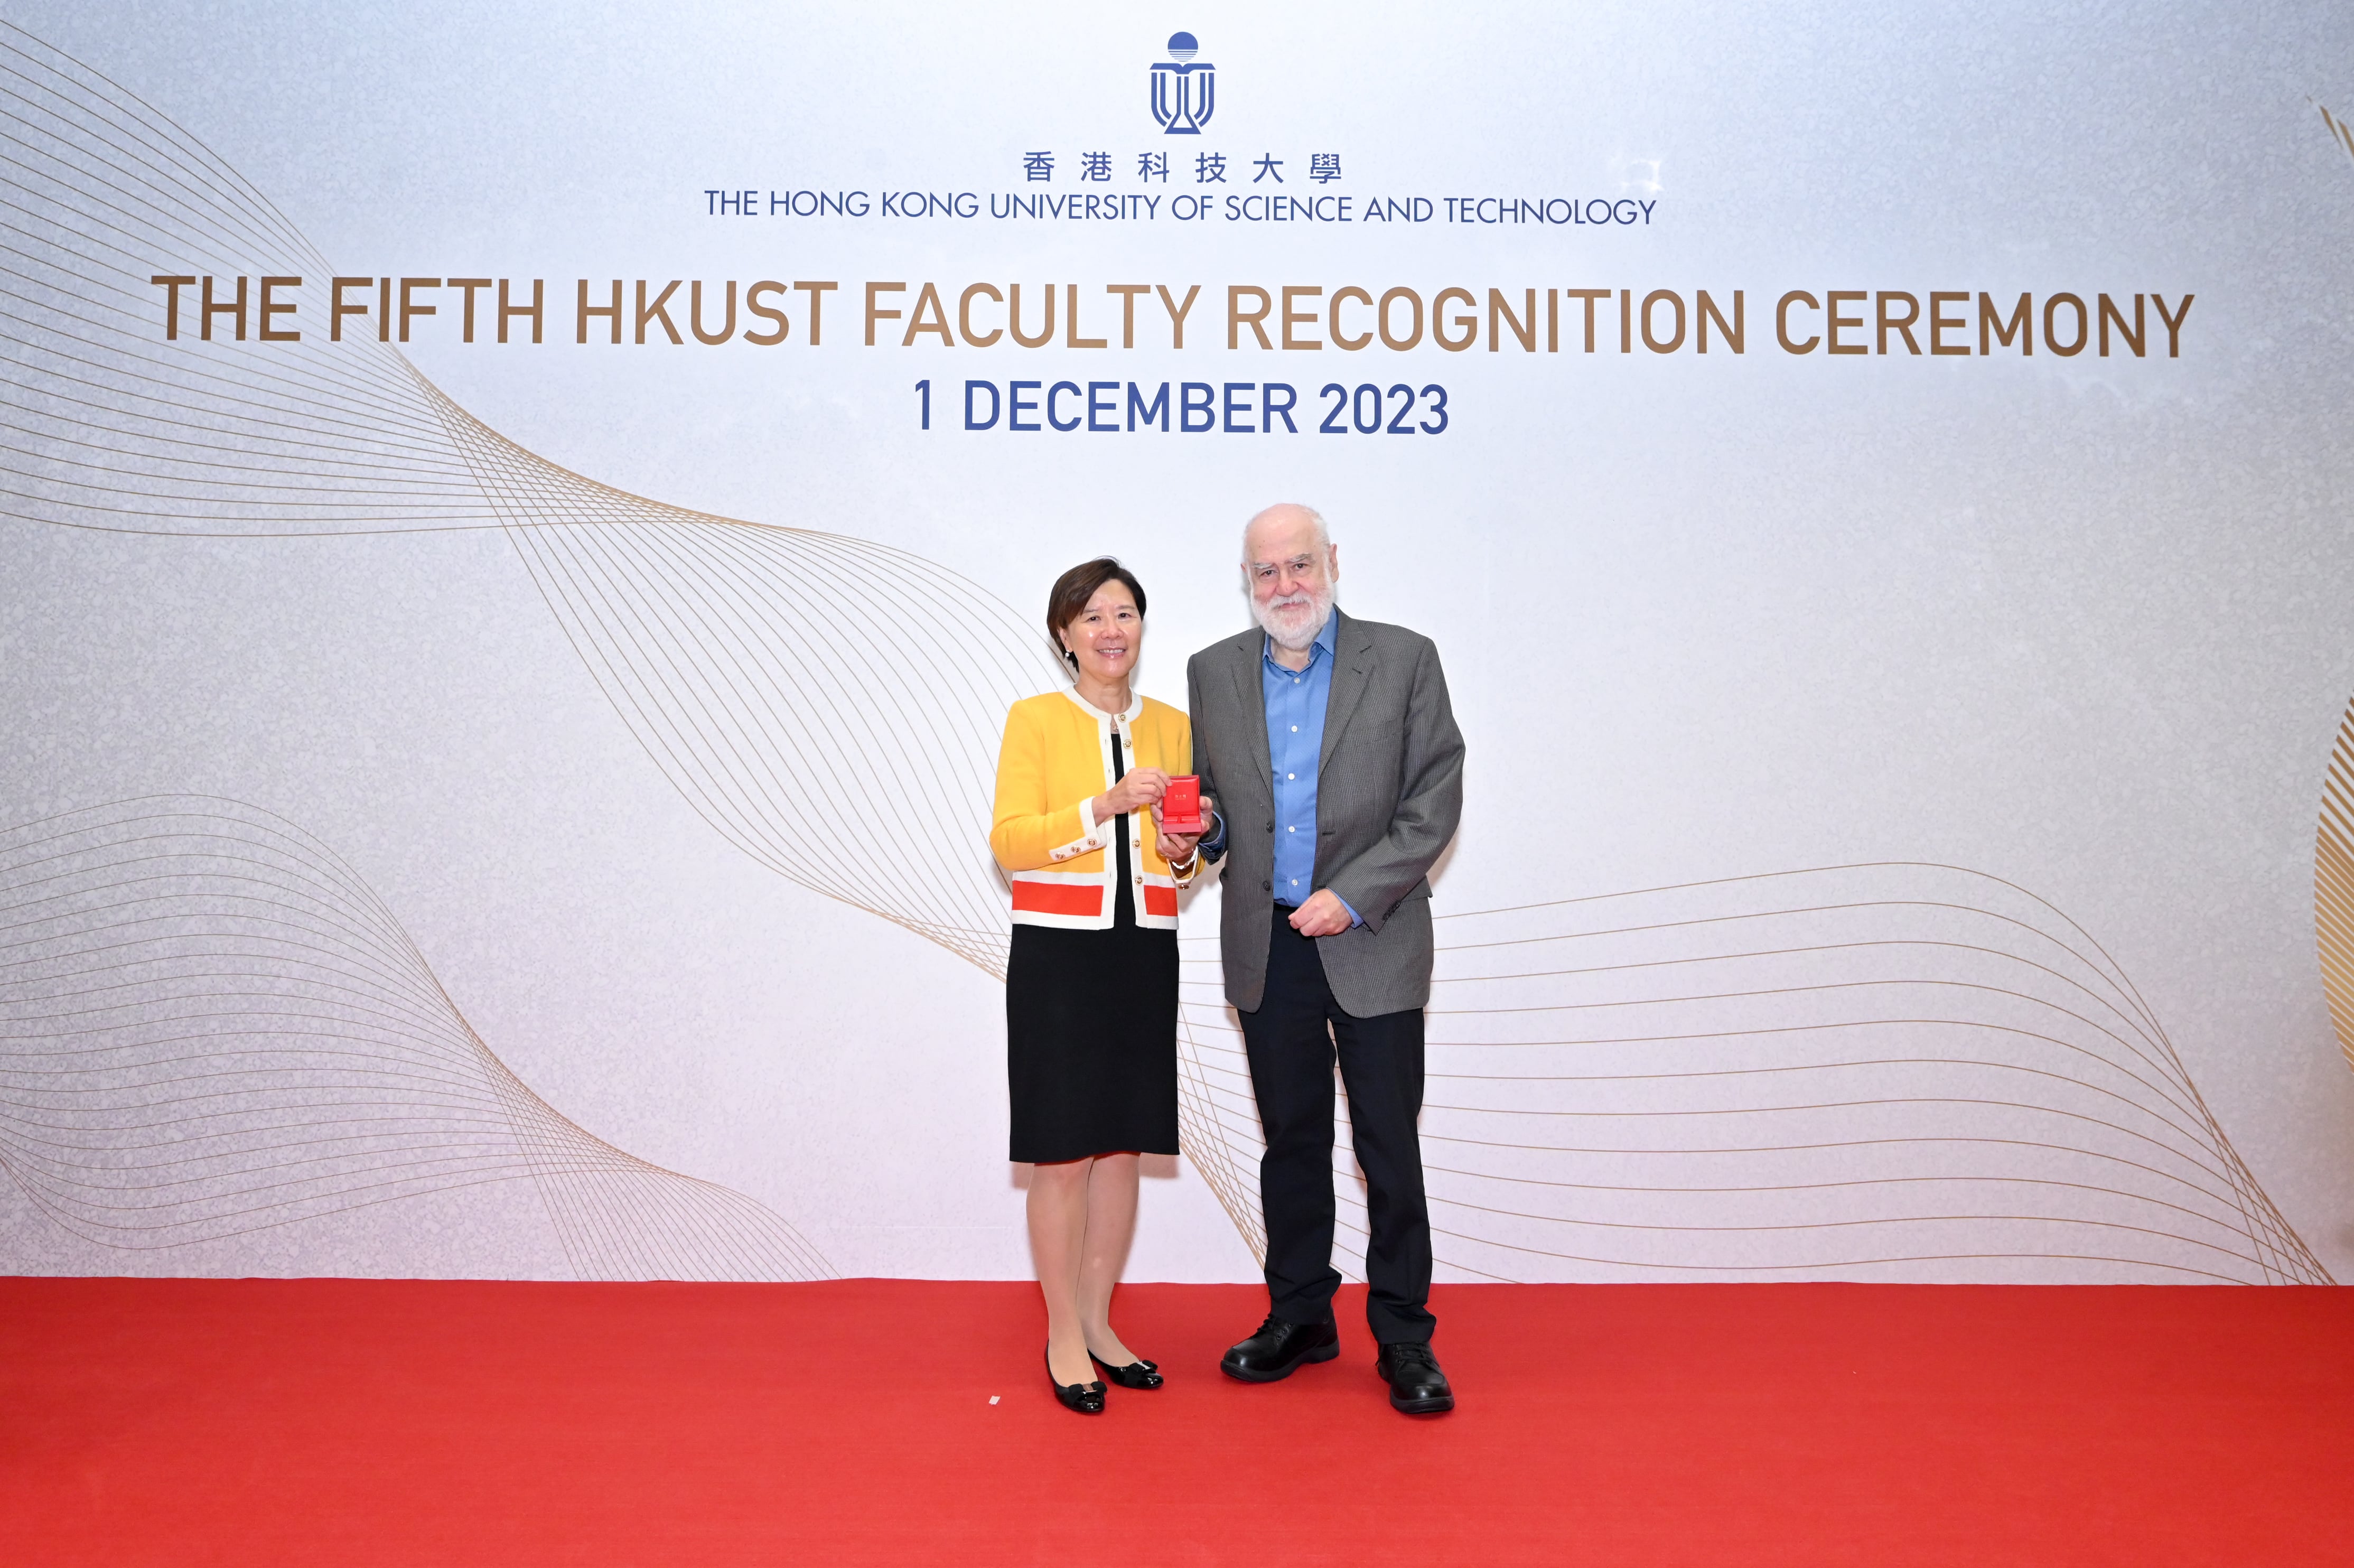 Faculty Recognition Ceremony 2023